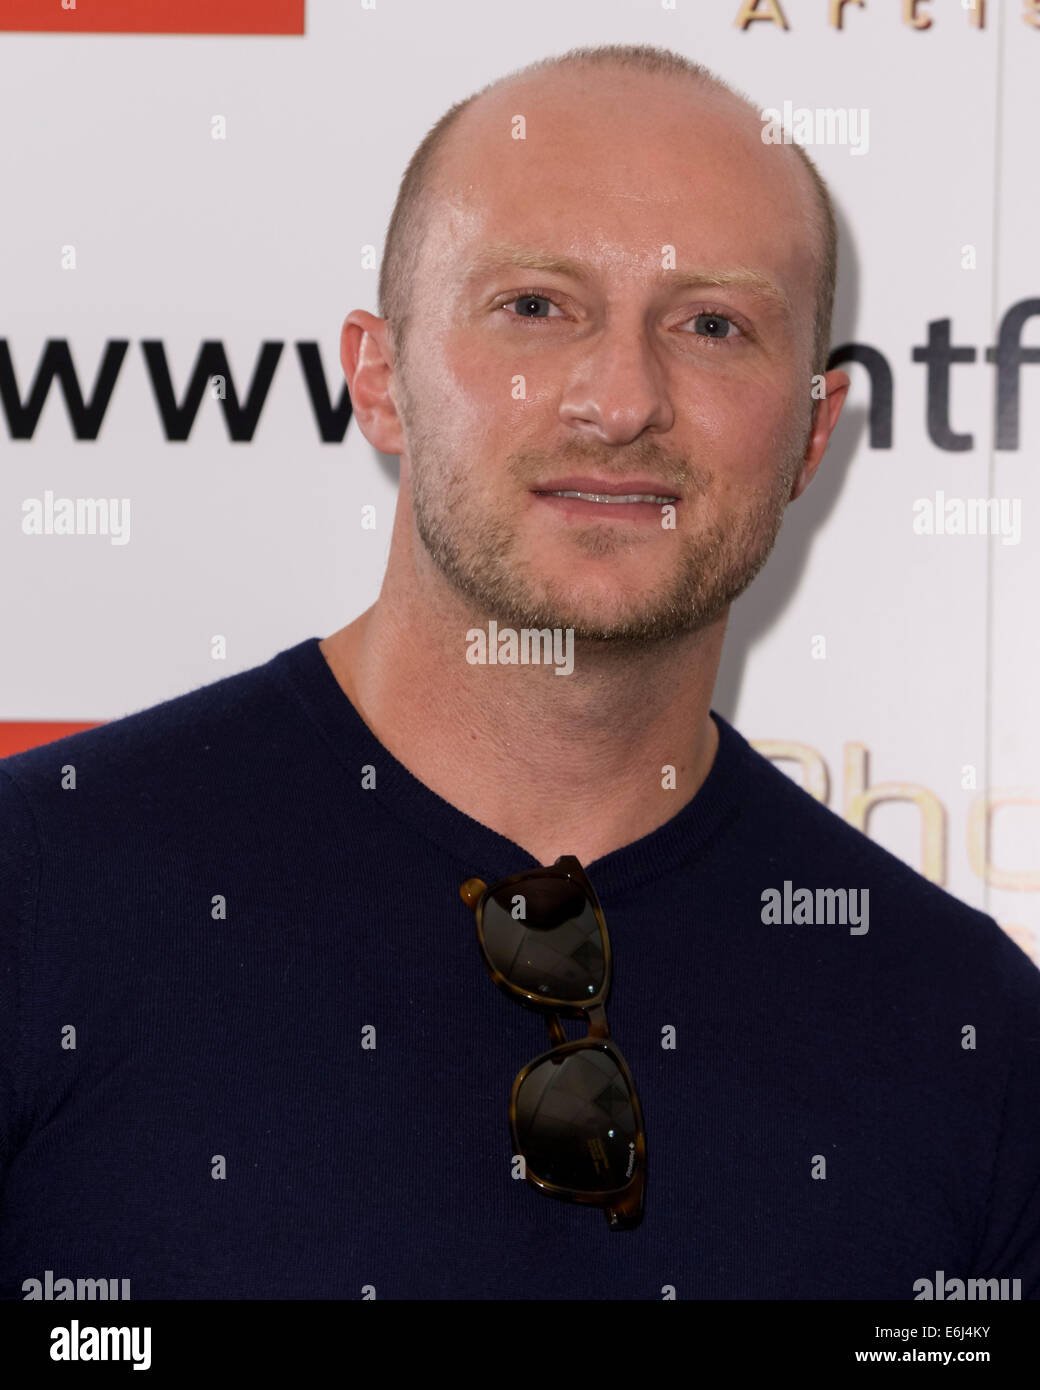 The 15th Film4 Frightfest on 24/08/2014 at The VUE West End, London. The World Premiere of Extinction, cast and crew attend Persons pictured: Ben Loyd-Holmes. Picture by Julie Edwards Stock Photo